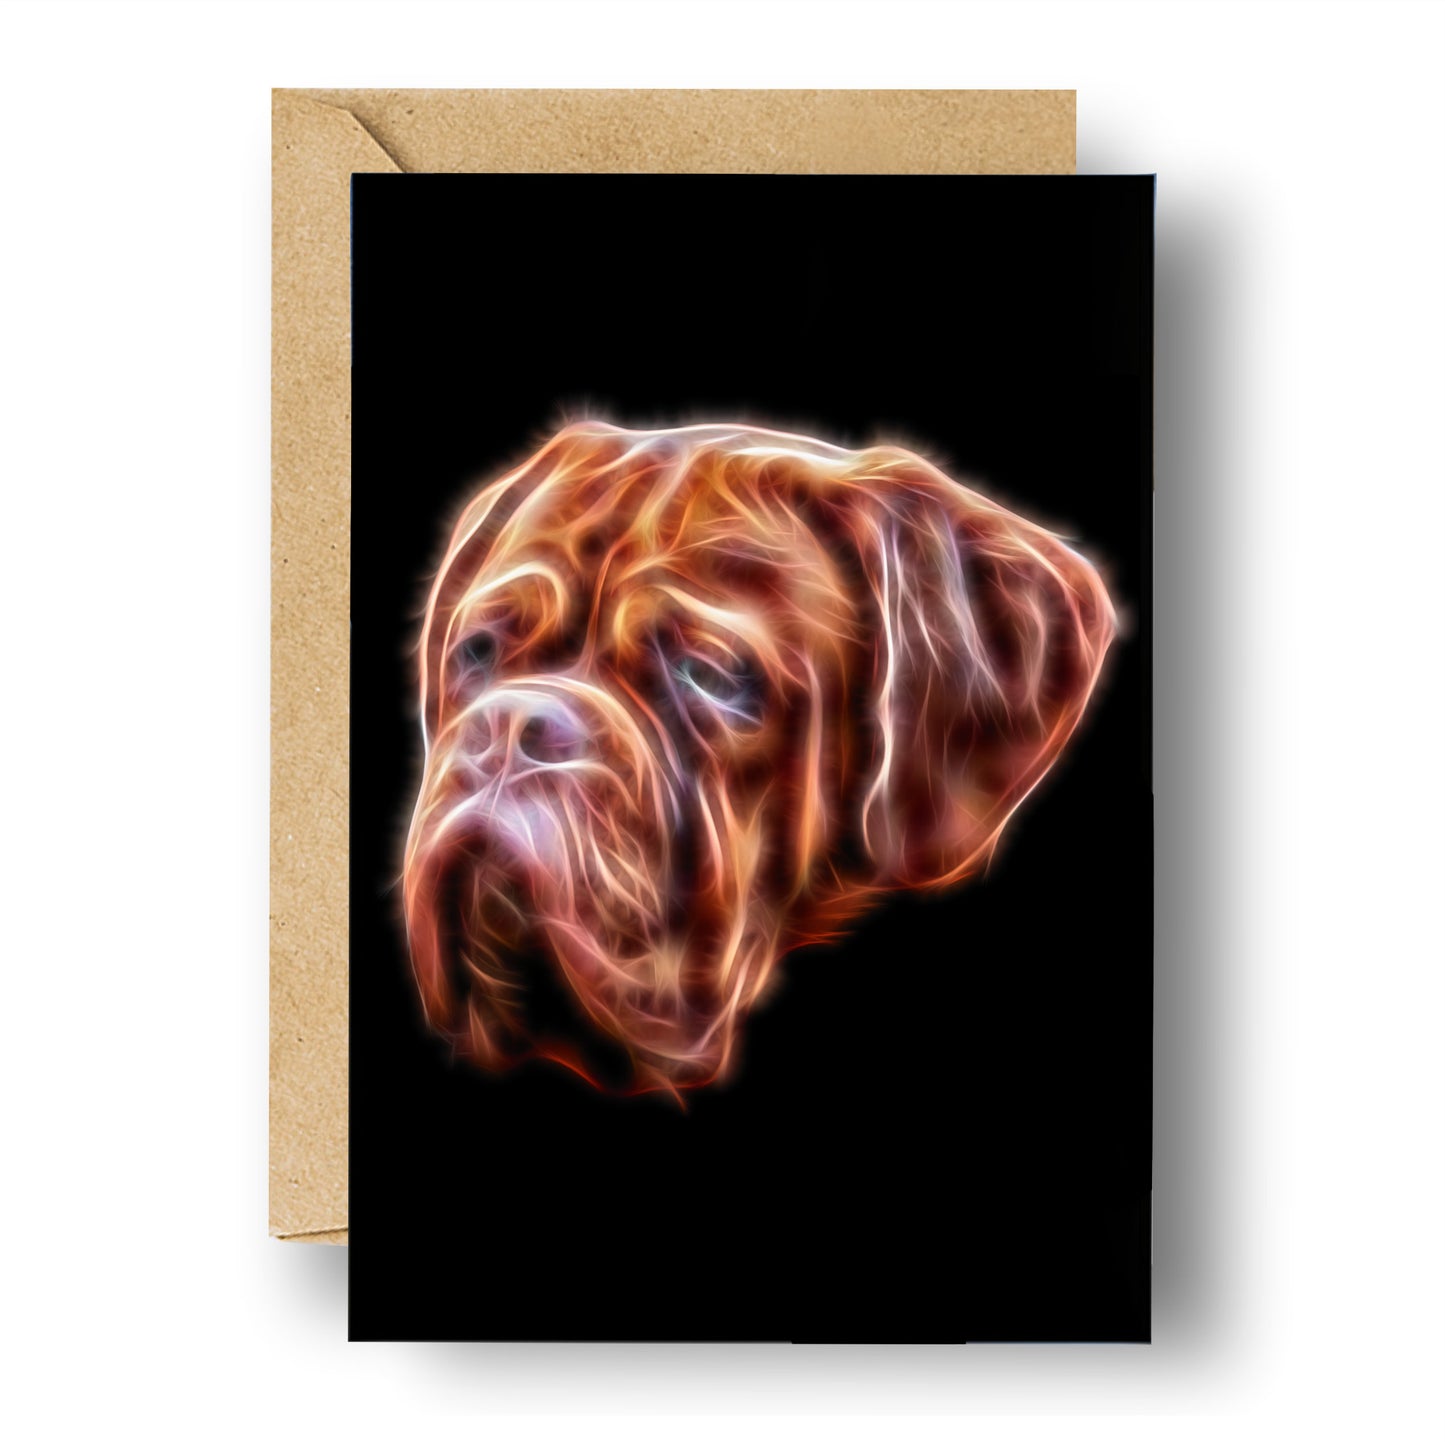 Dogue De Bordeaux Greeting Card Blank Inside for Birthdays or any other Occasion